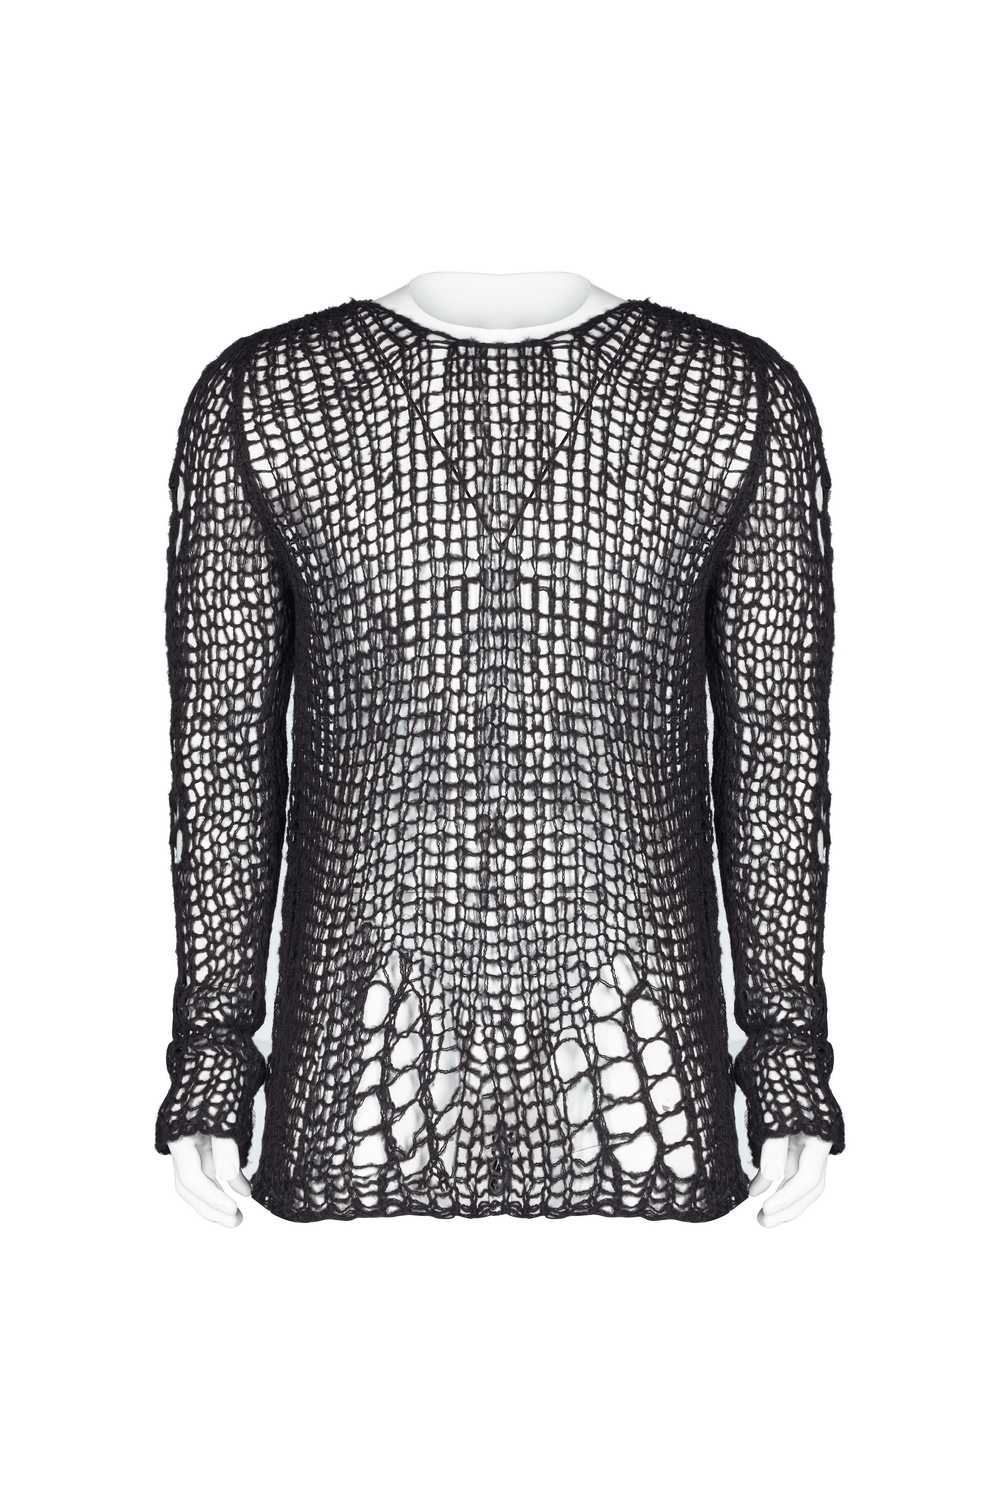 Stylish Knit Mesh Pullover - Trendy and Breathable